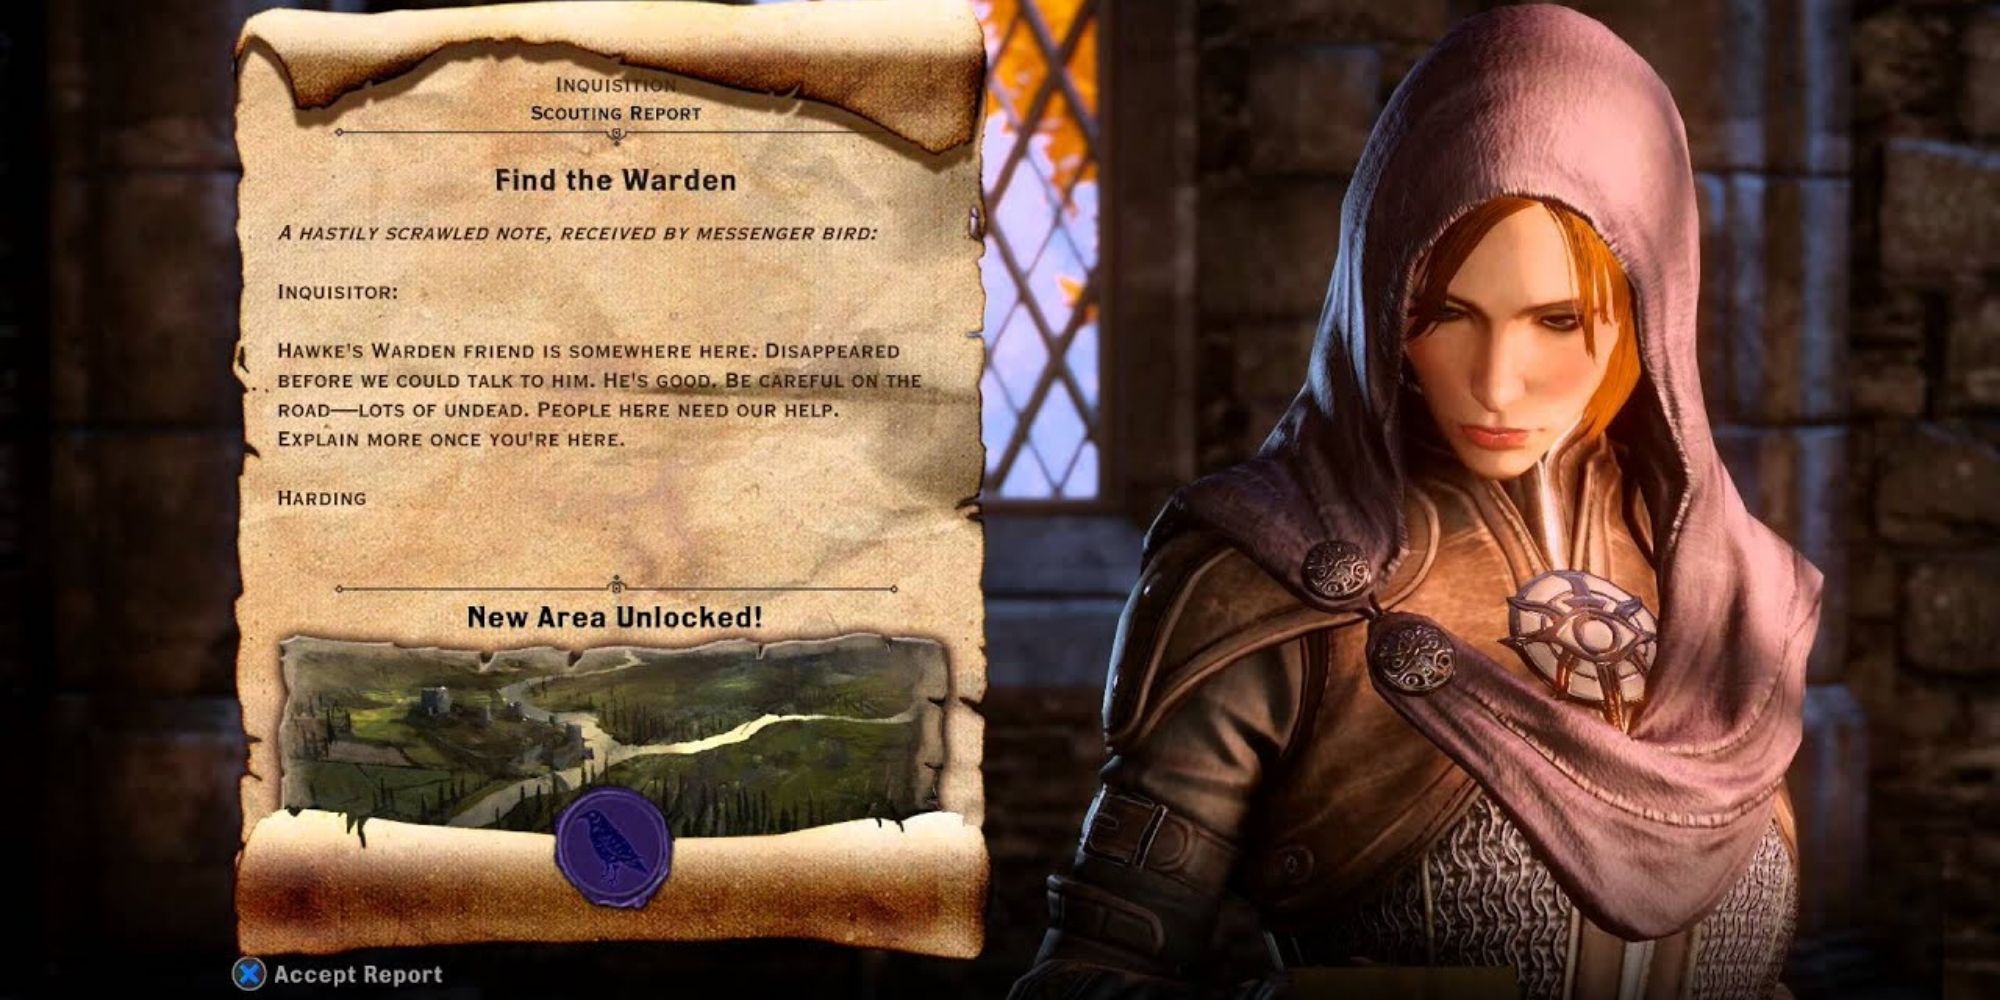 Dragon Age Inquisition - Find the Warden War Table Operation, Completed